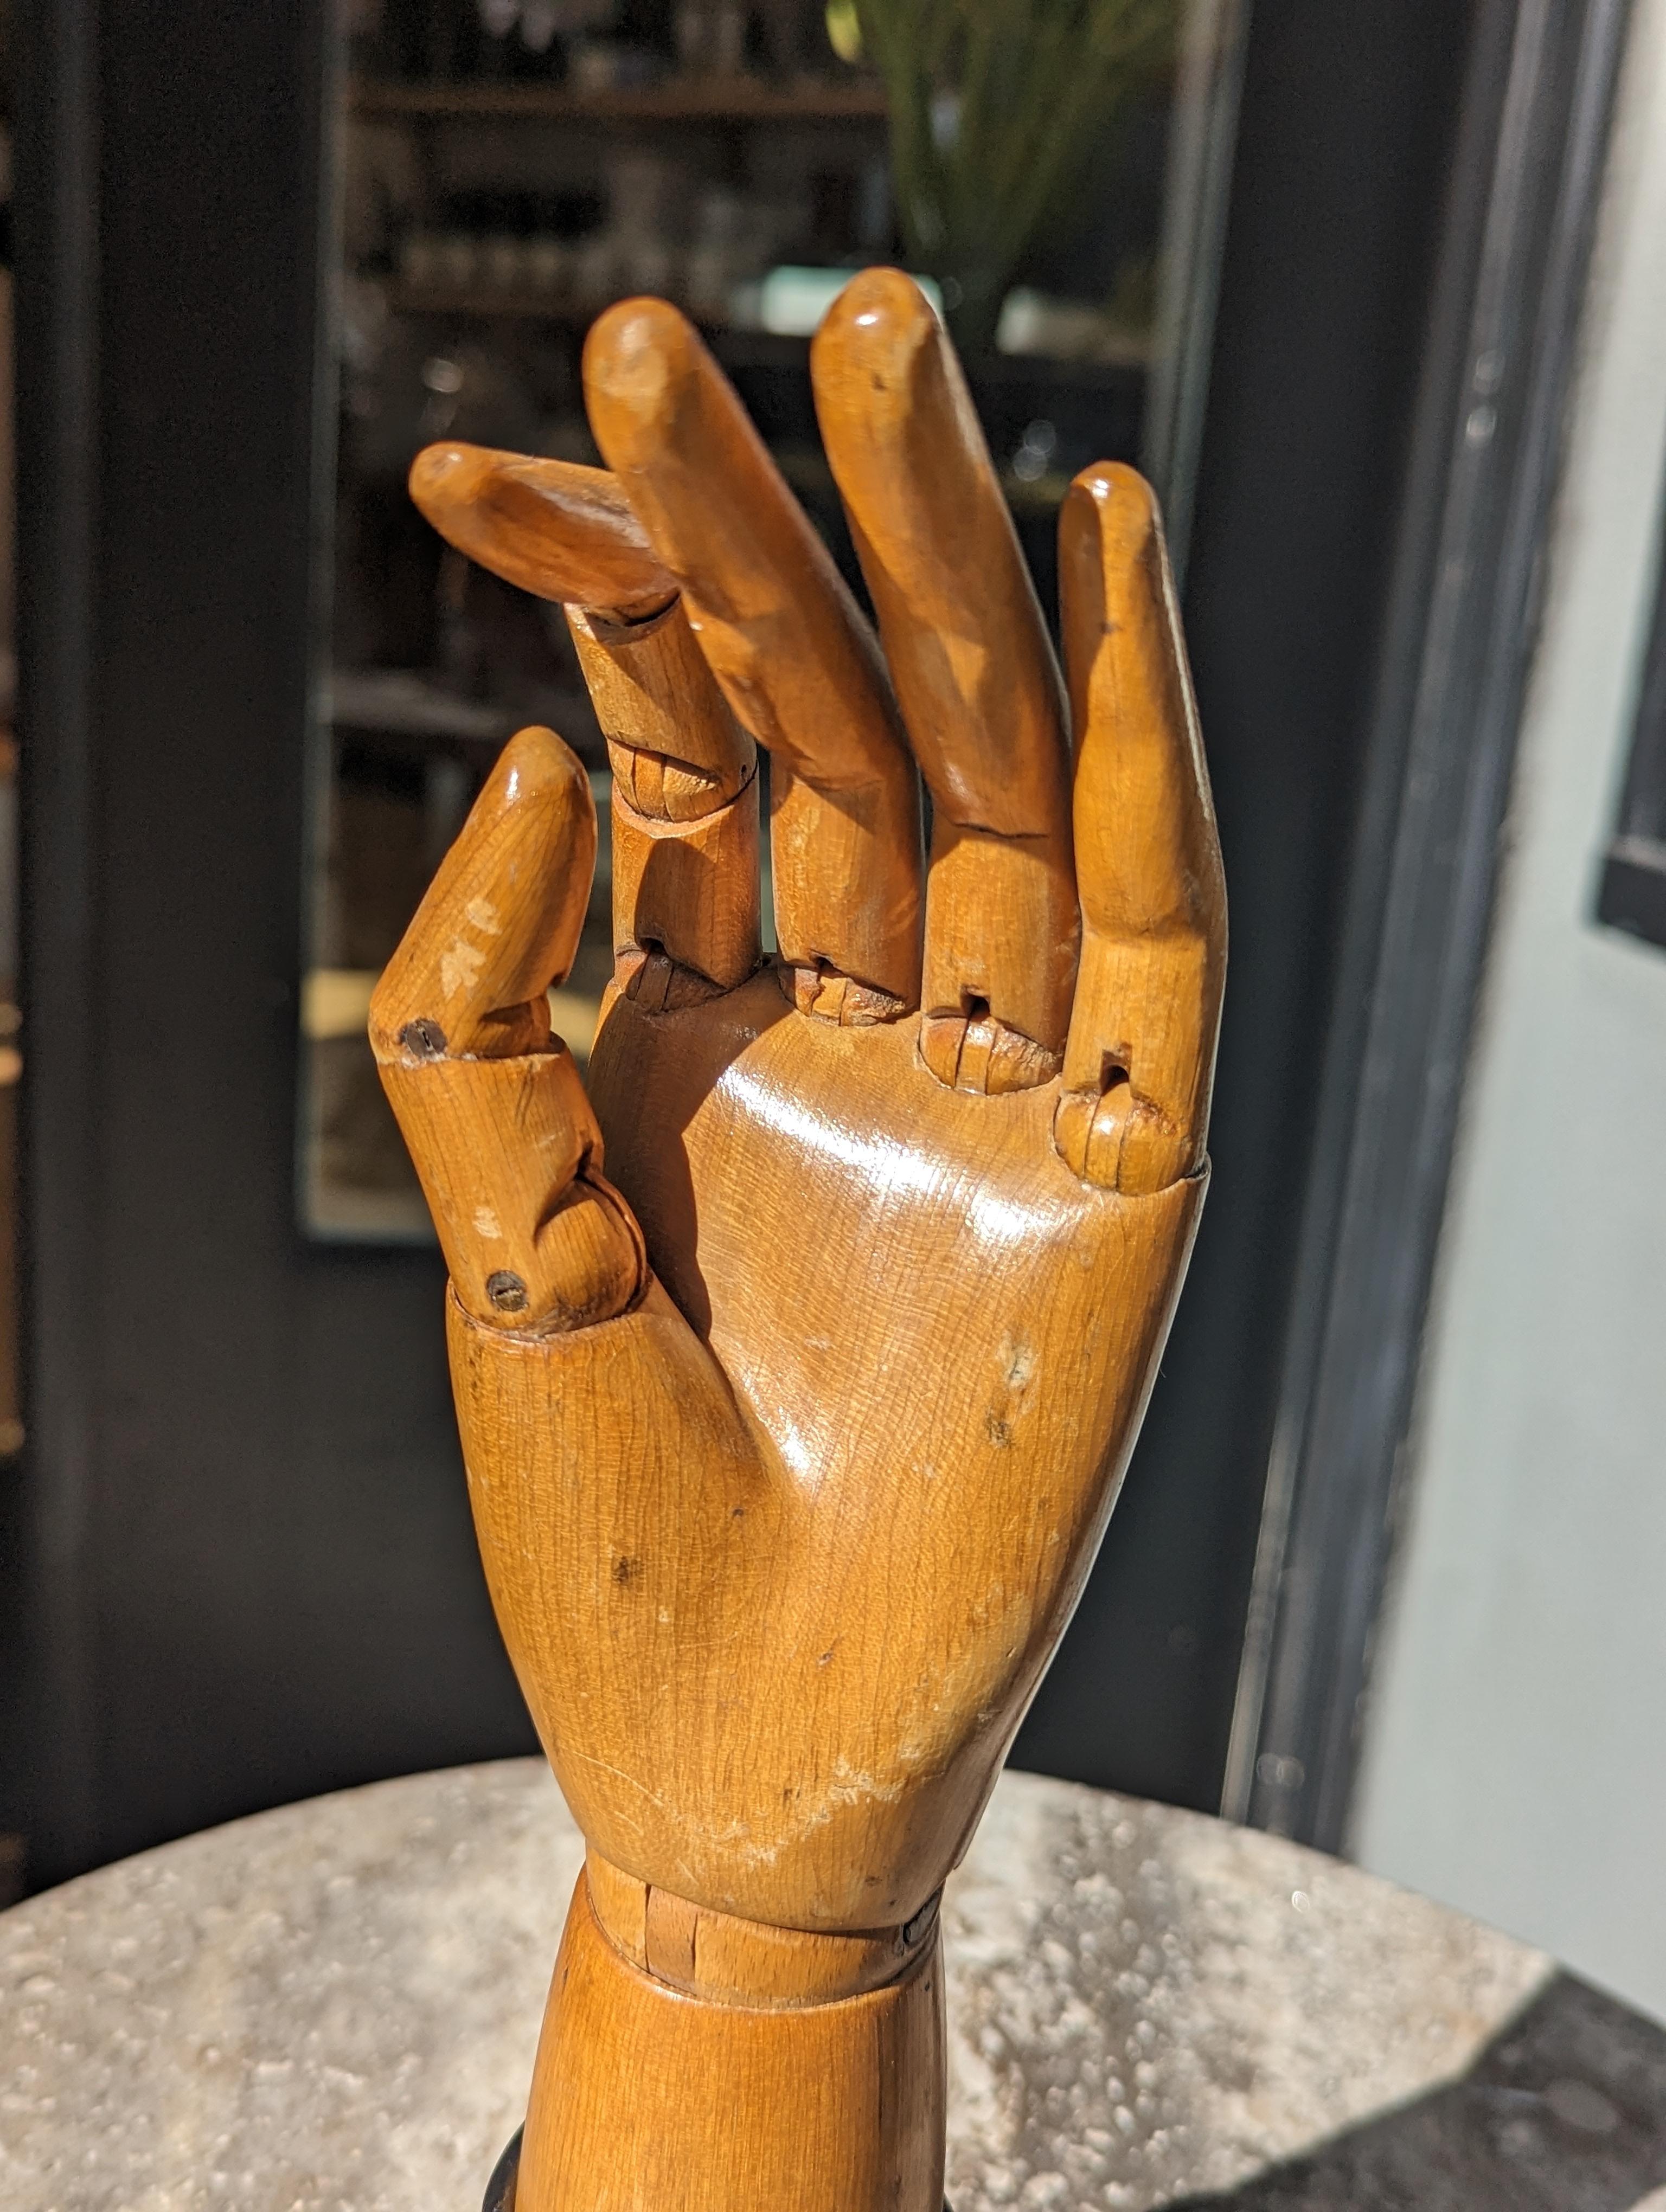 Exquisite C.1900 Articulated Wooden Hand on stand

Unleash your creativity or add a touch of history to your space with these captivating antique articulated wooden hands.Carved from warm beech wood, their timeless design whispers of a bygone era.